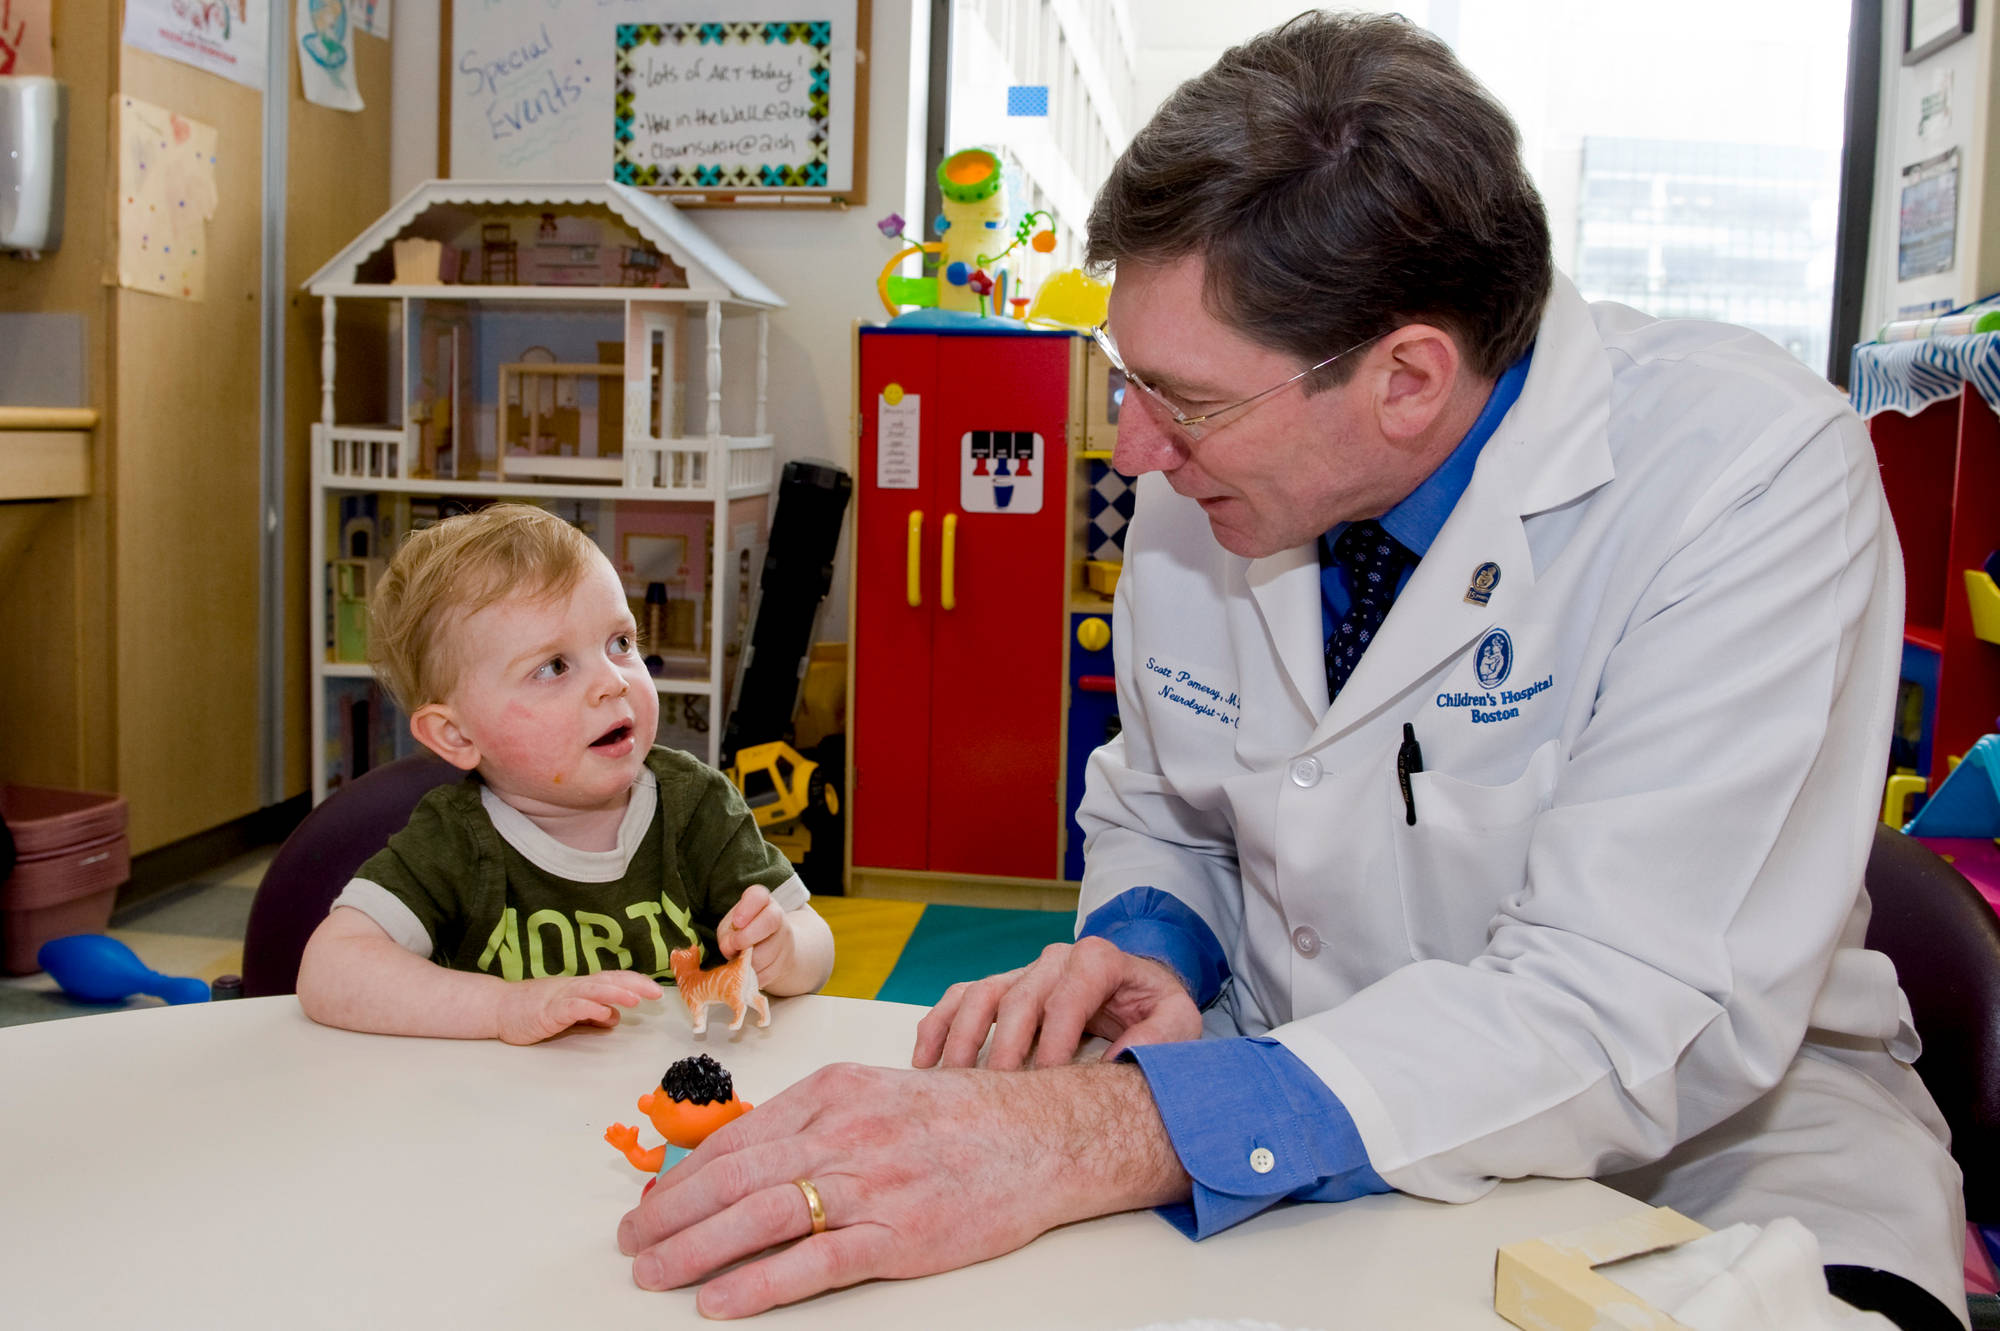 Current chief of neurology at Boston Children's, Scott L. Pomeroy, MD, PhD, is shown with a patient.